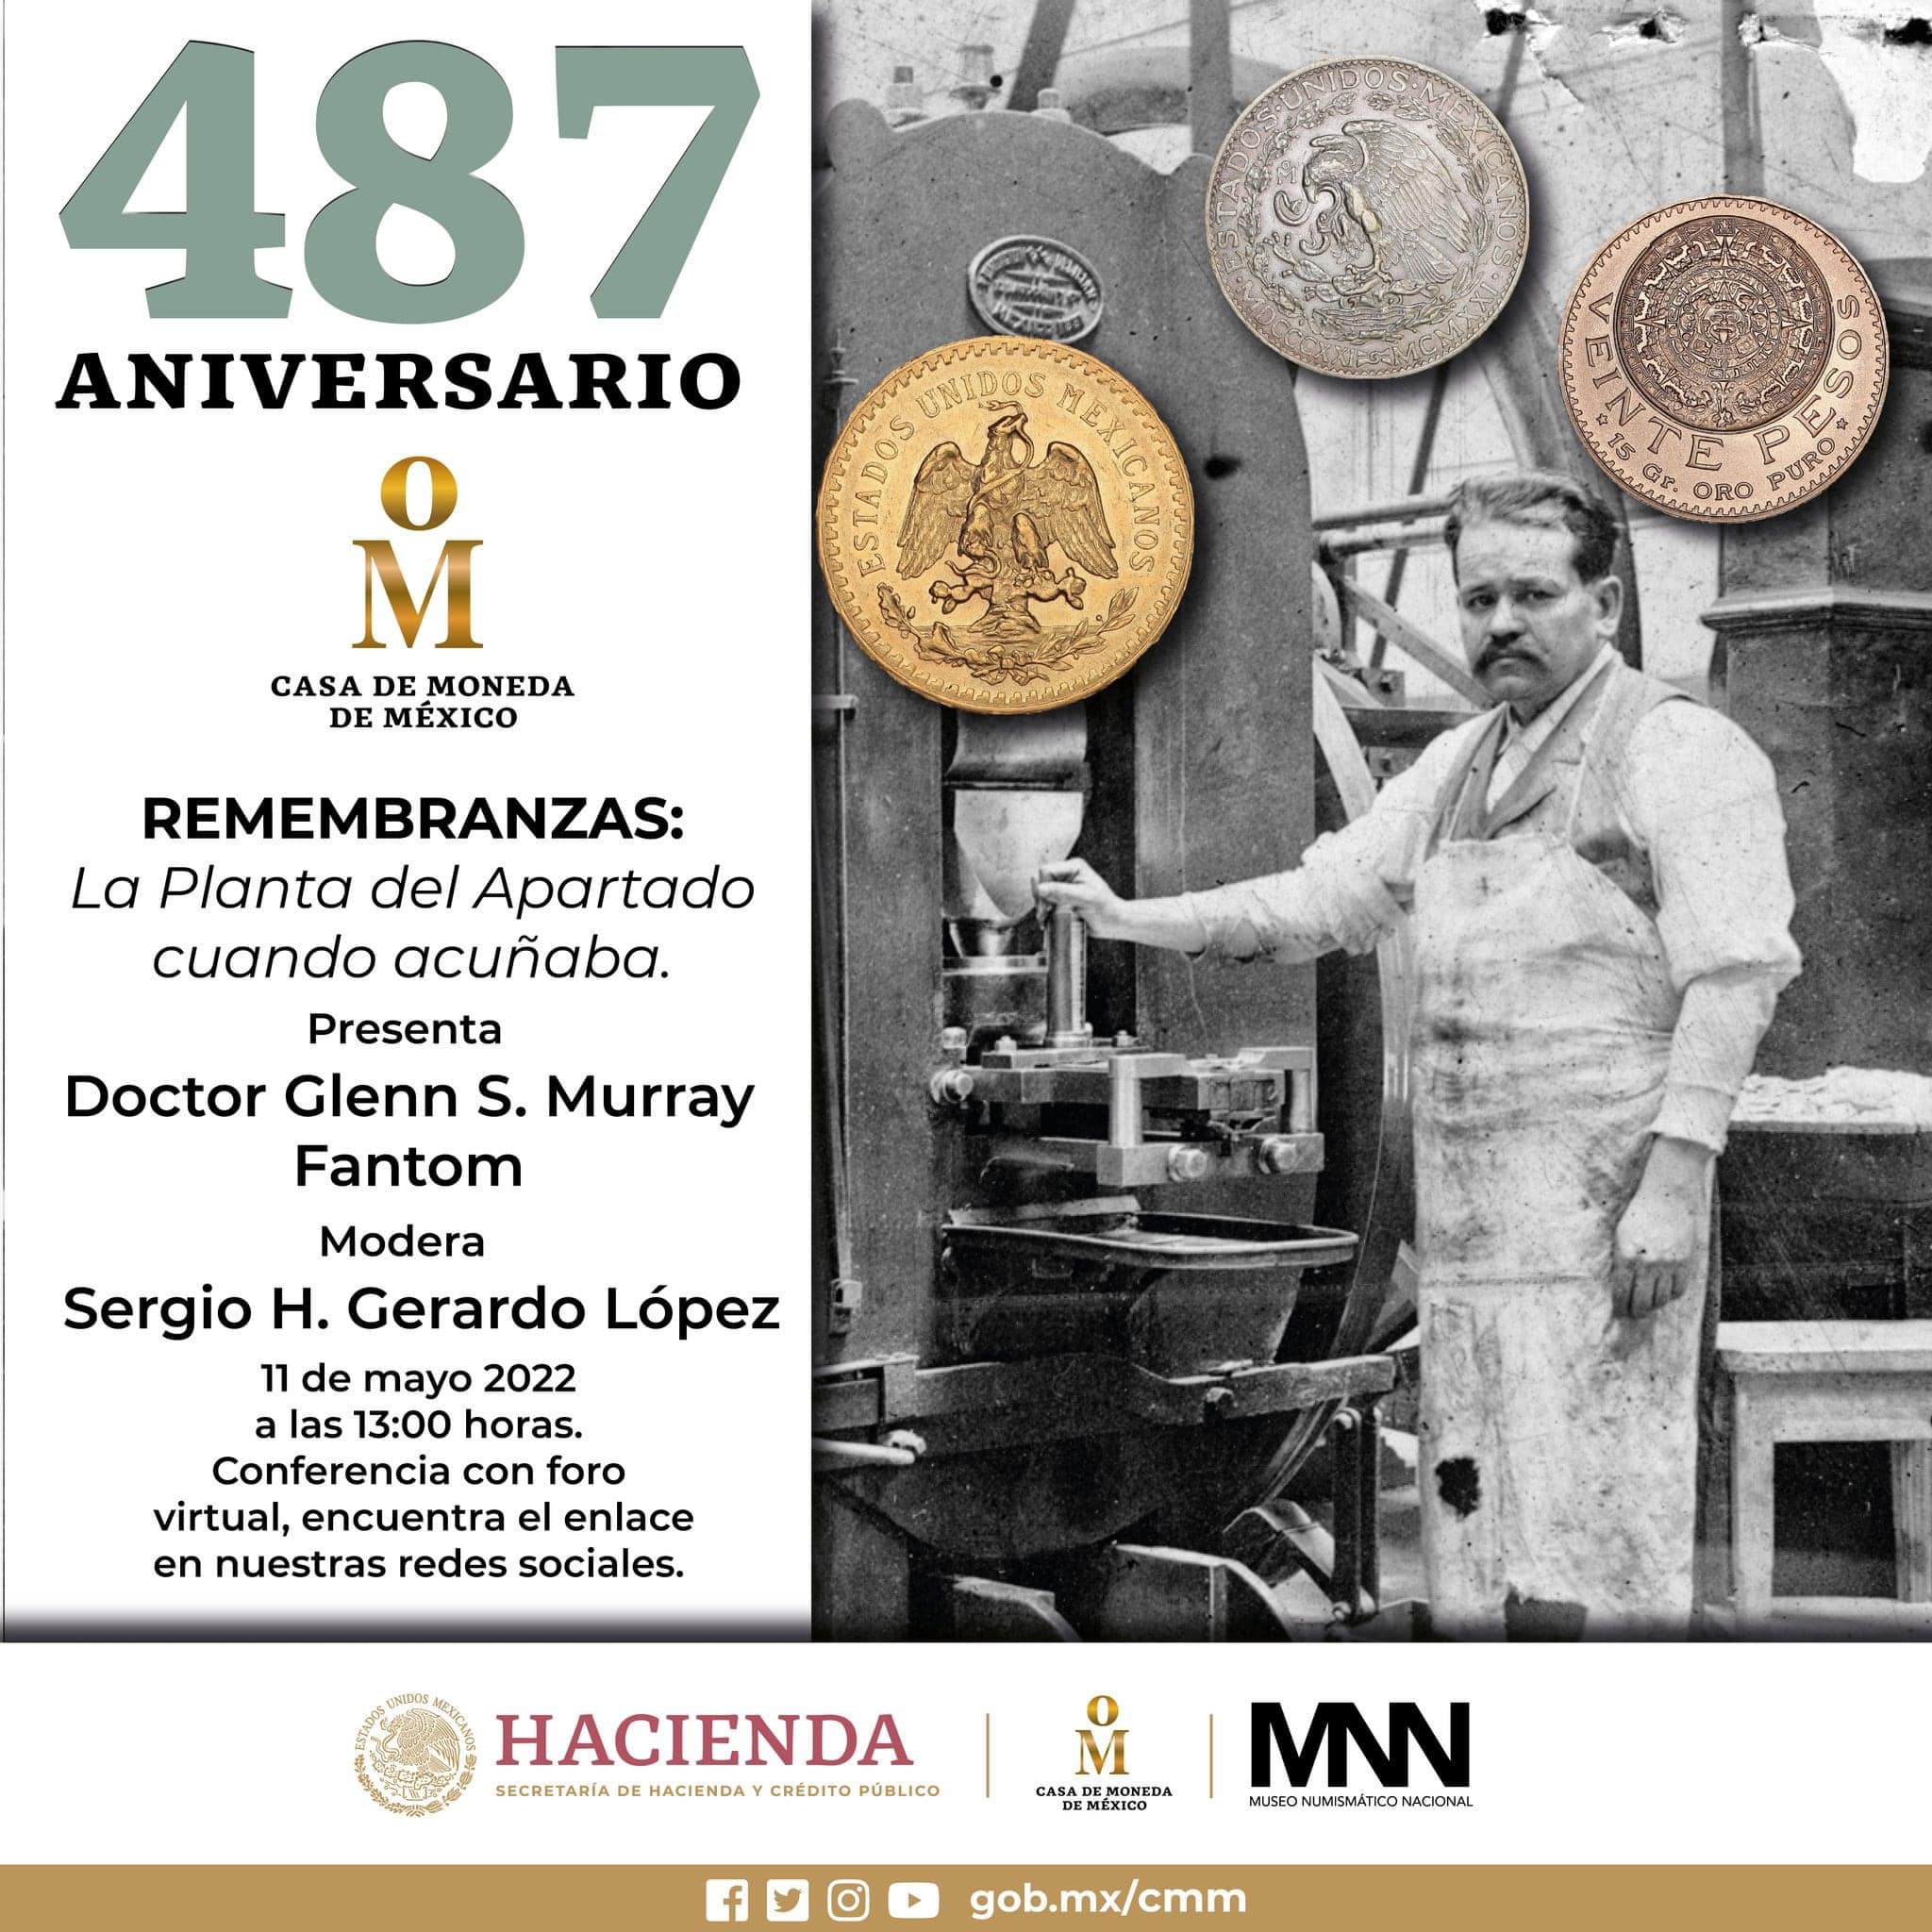 Dr. Murray will give the inaugural presentation at the 487 Anniversary of the Mexico Mint